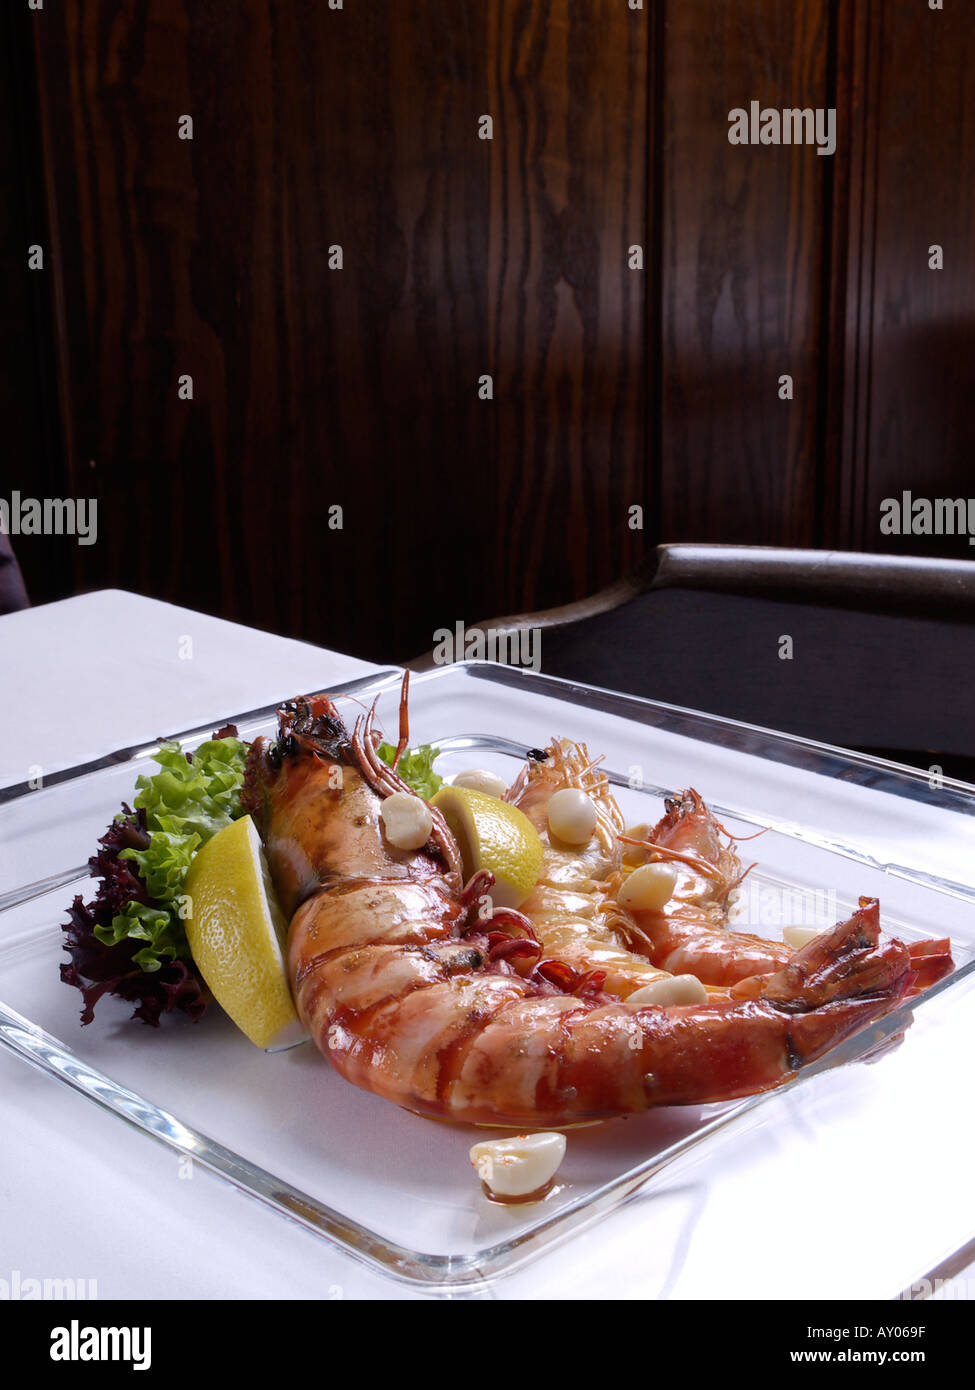 Three gambas of different sizes on a square glass plate in a restaurant Stock Photo